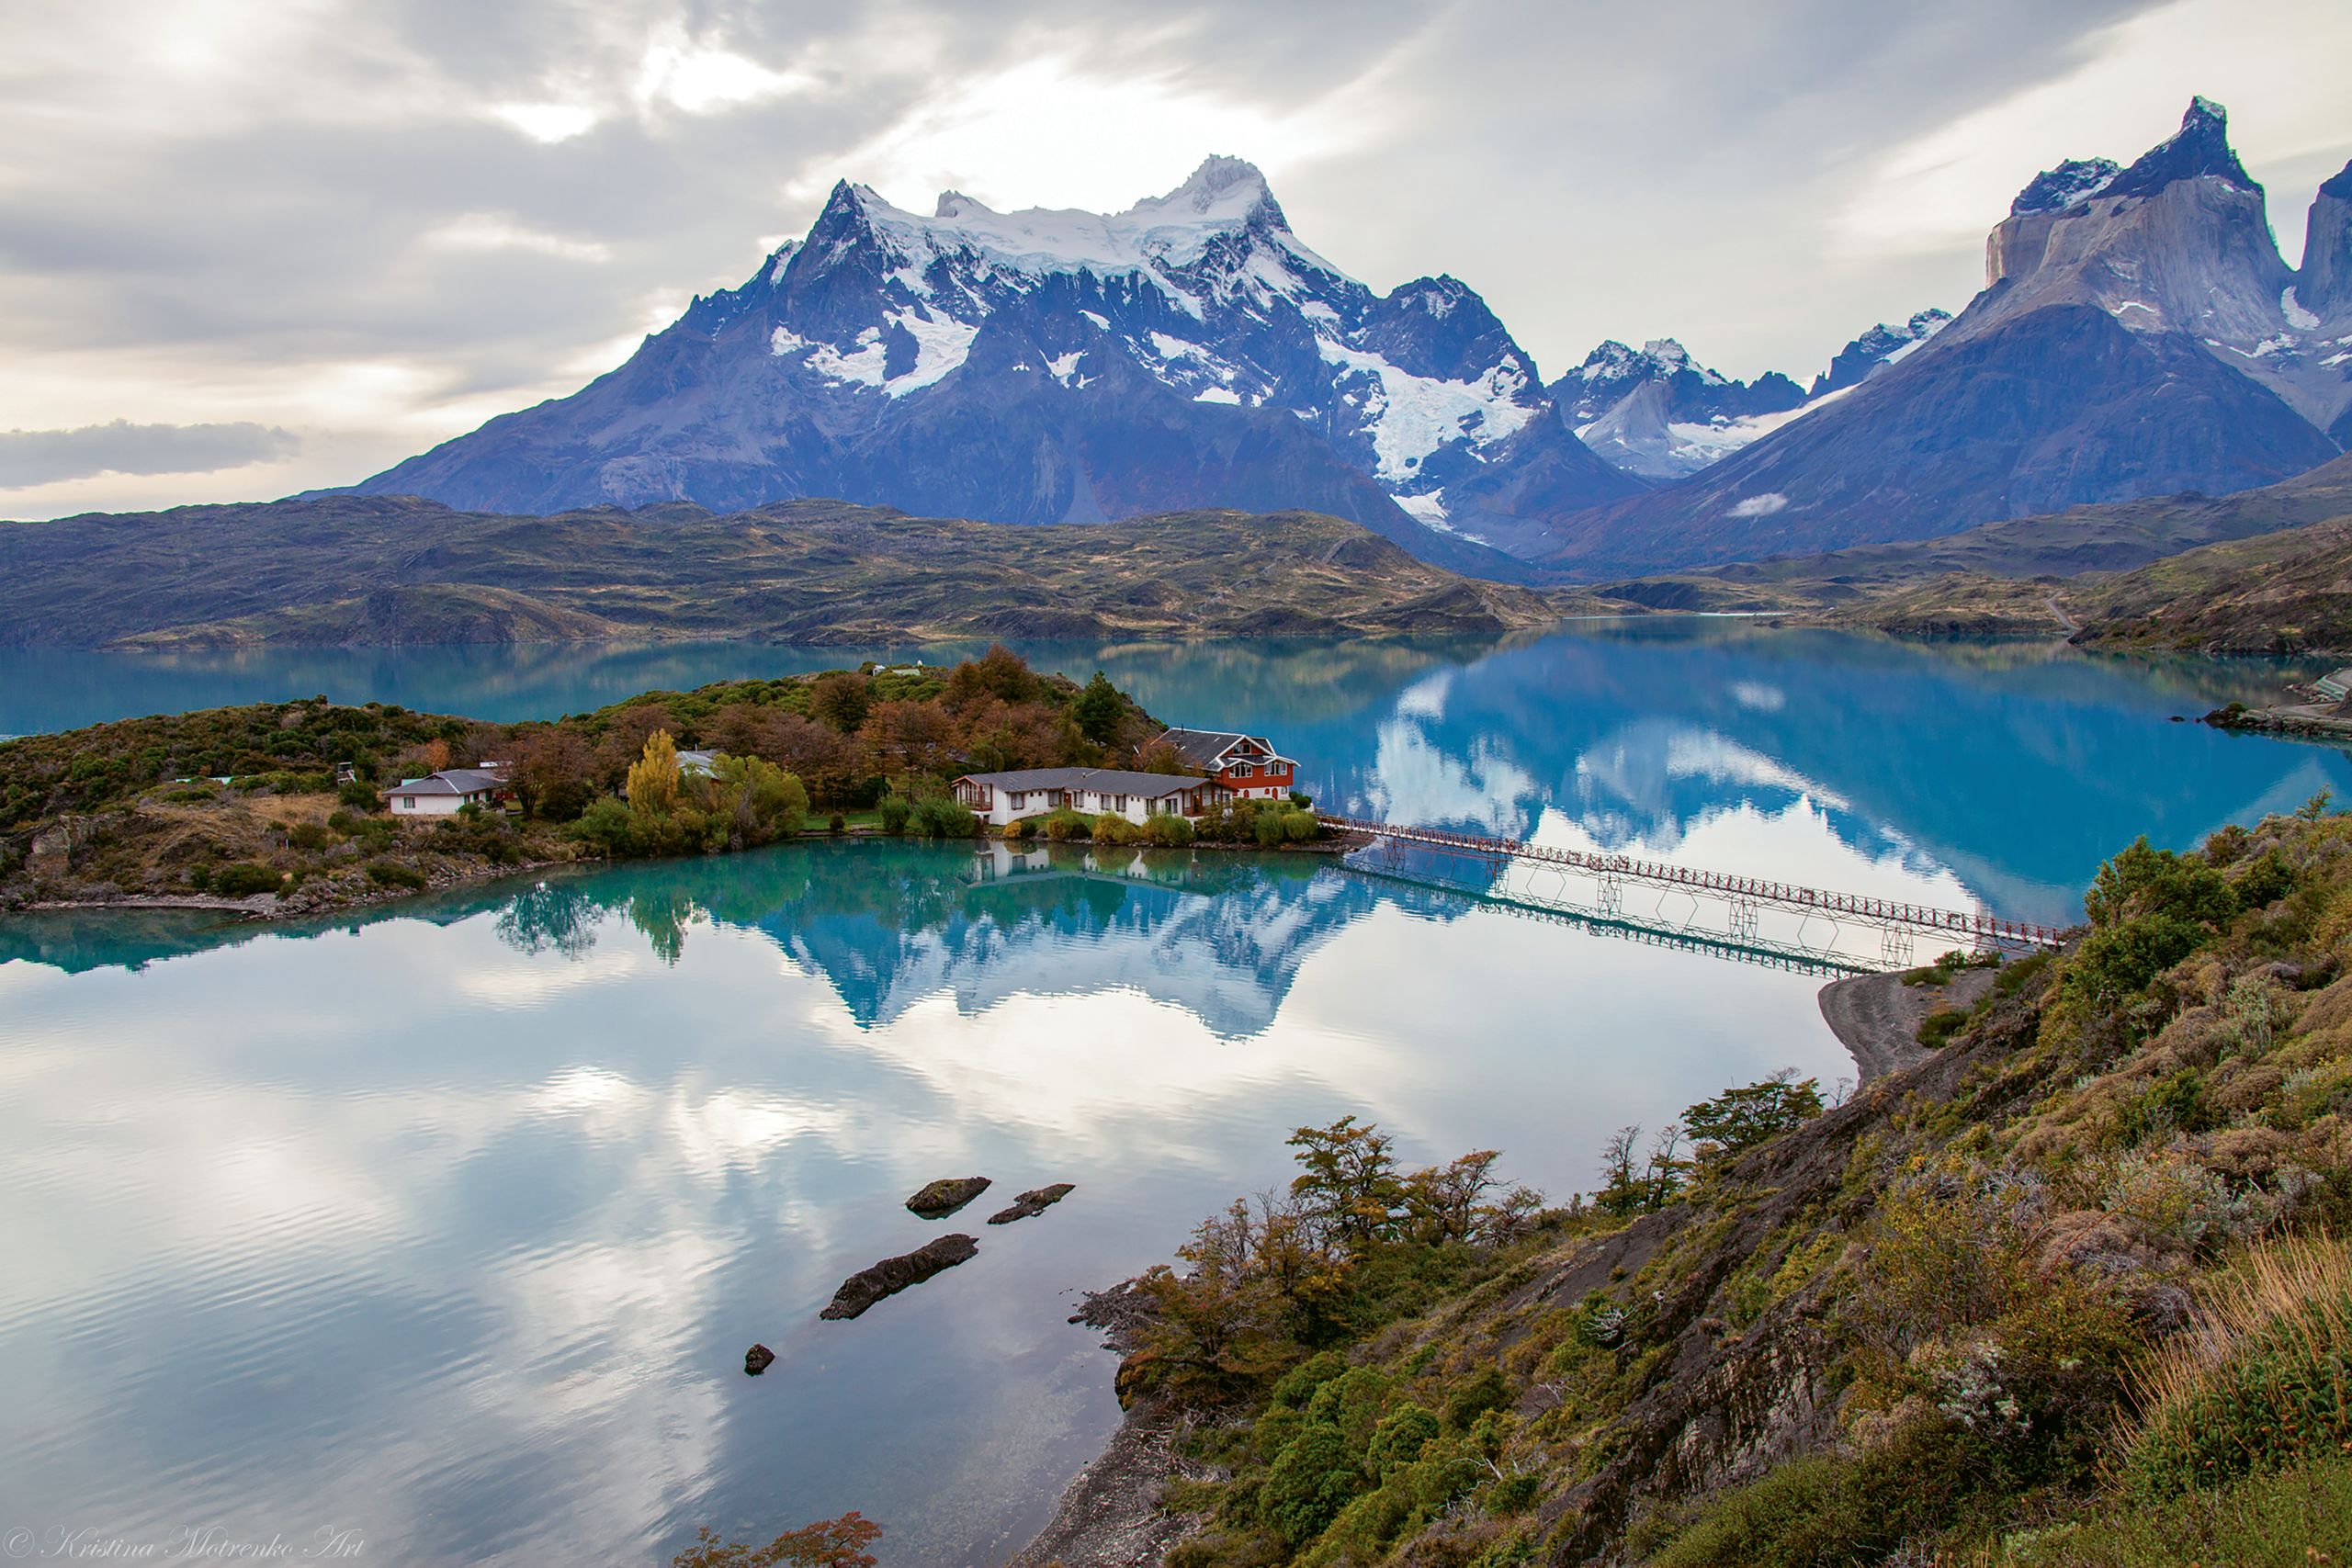 Luxury adventure travel companies specialize in high-end trips to out-of-the-way destinations, such as Patagonia. (Photo courtesy of Pelorus)